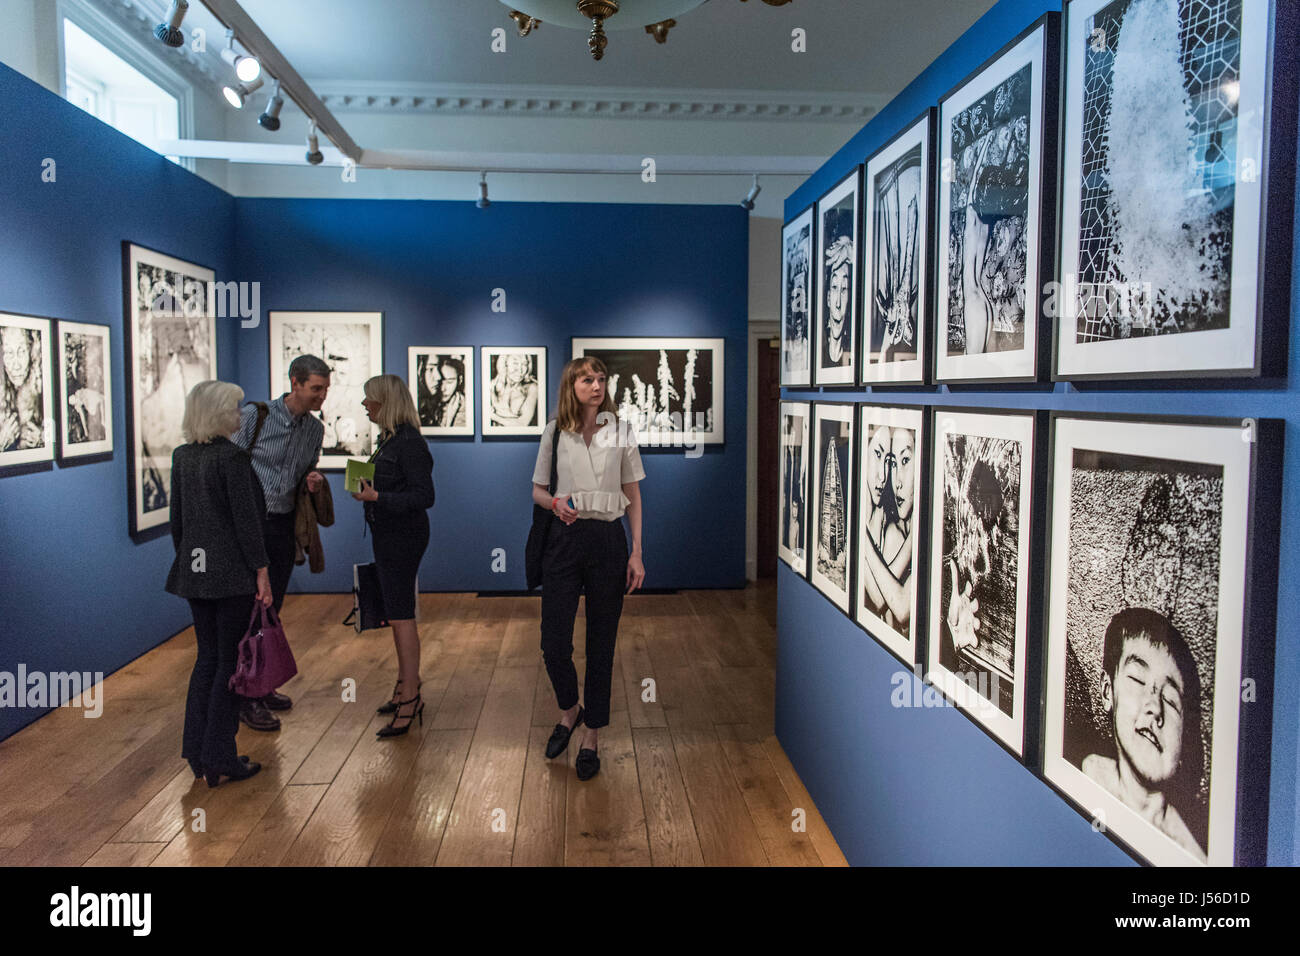 London, UK. 17th May, 2017. Road Of Bones by Jacob Aue Sobol in the Leica Gallery - Photo London, an international photography event in its third edition, Along with the selection of the world's leading galleries showing at the Fair, Photo London presents the Discovery section for the most exciting emerging galleries and artists. There is also a Public Programme bringing together special exhibitions and talks. The event runs until 21 May. London 17 May 2017. Credit: Guy Bell/Alamy Live News Stock Photo